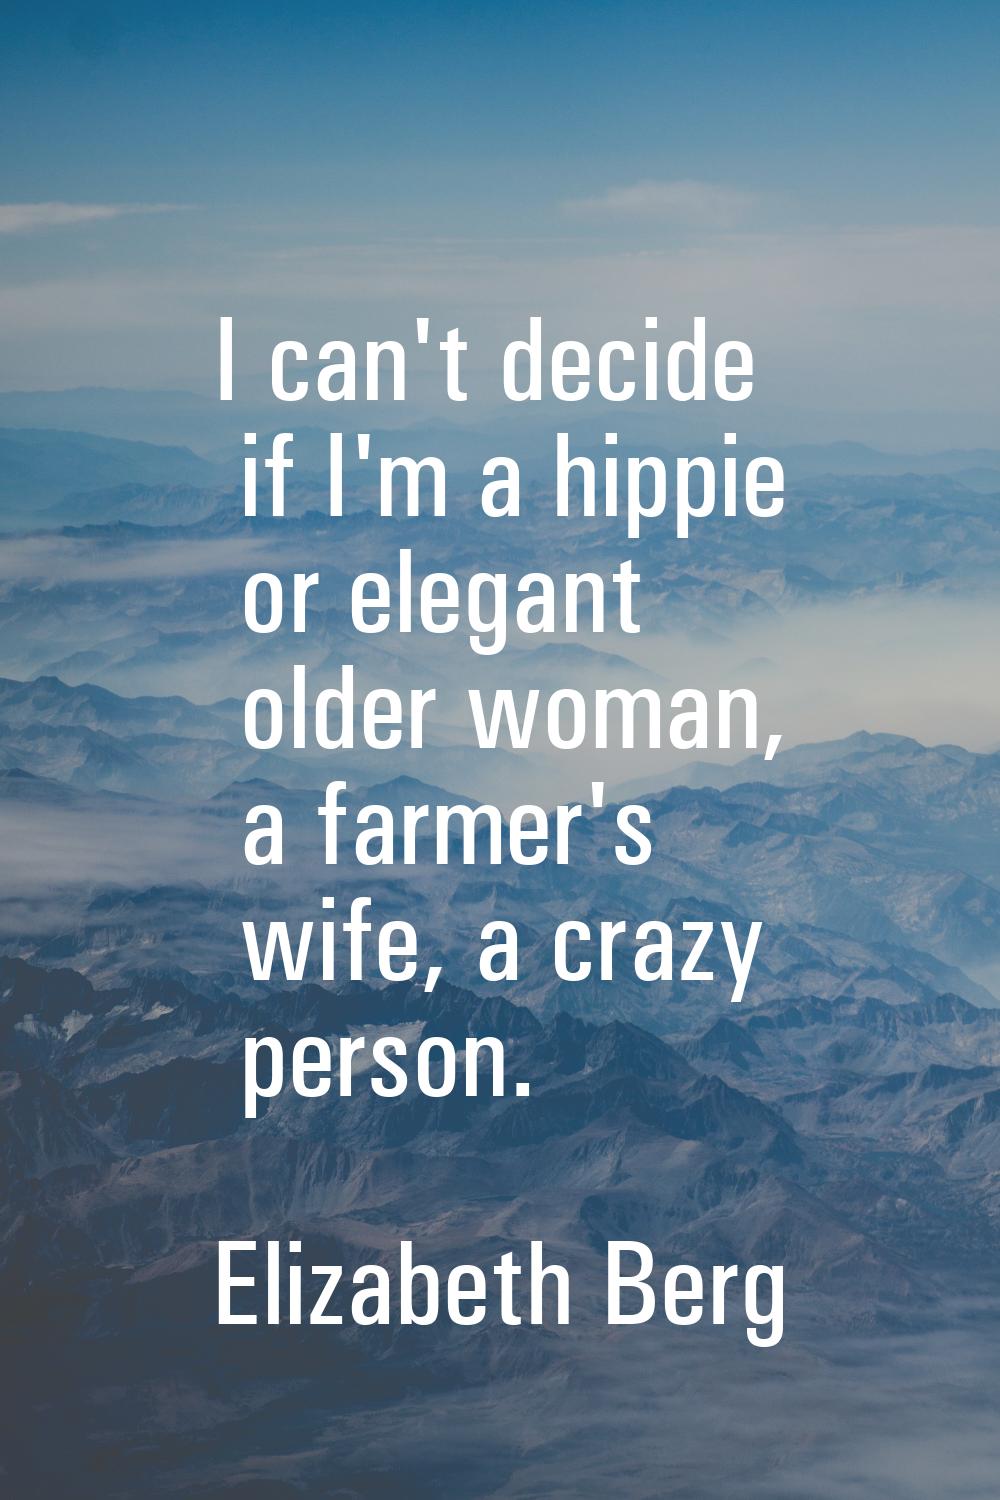 I can't decide if I'm a hippie or elegant older woman, a farmer's wife, a crazy person.